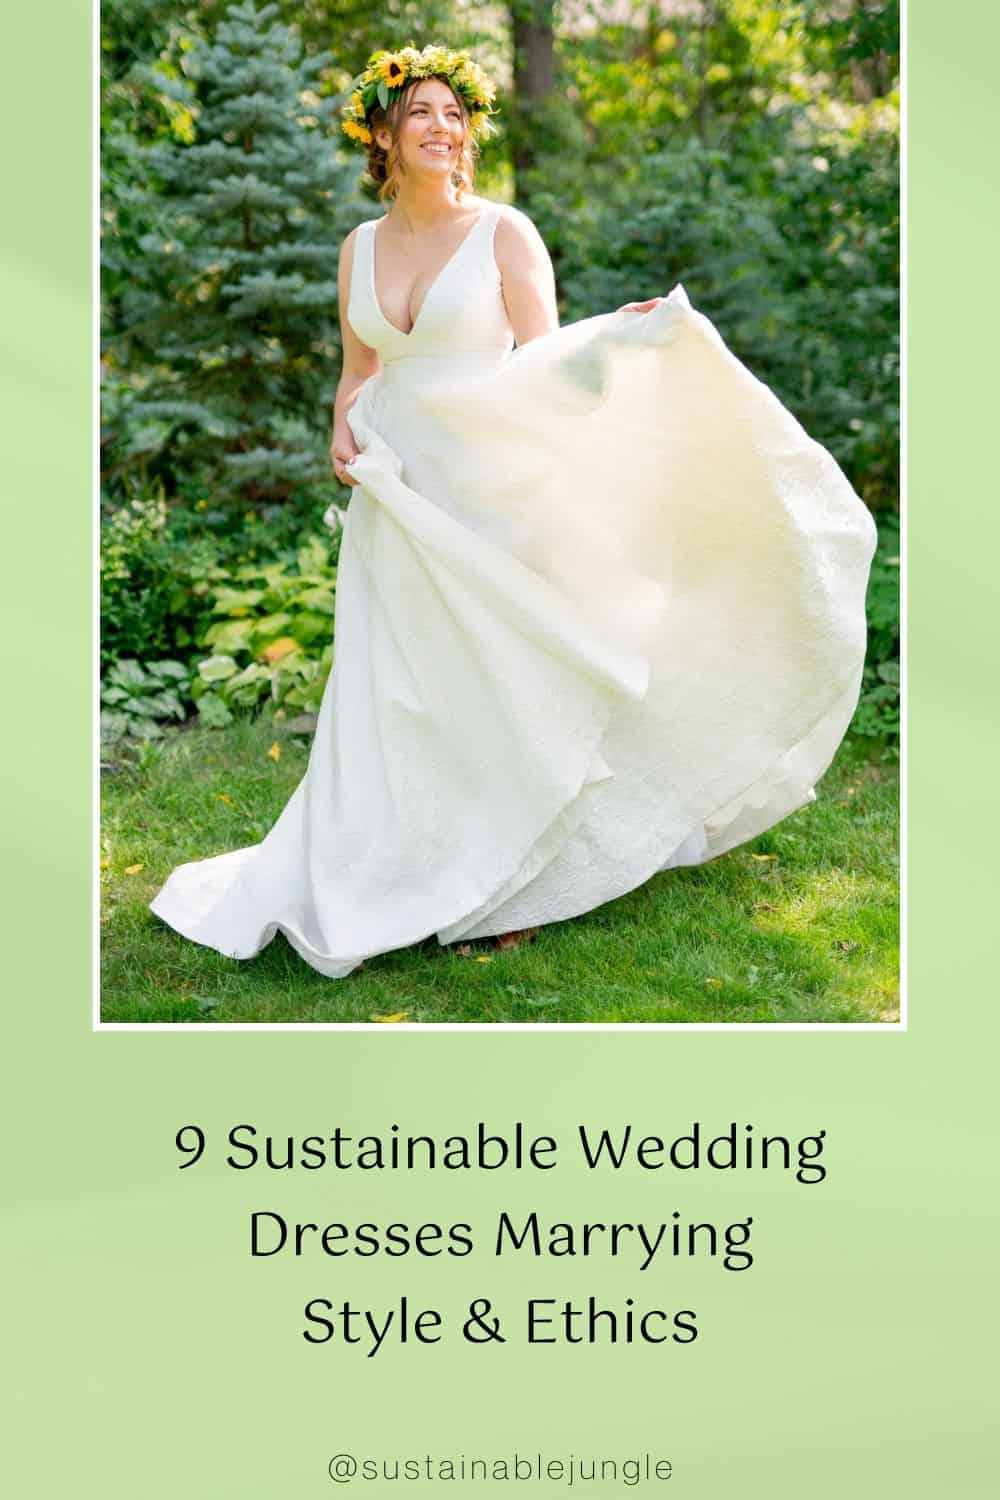 9 Sustainable Wedding Dresses Marrying Style & Ethics Image by Pre-Owned Wedding Dresses #sustainableweddingdresses #sustainableweddingdressbrands #ecofriendlyweddingdresses #sustainablebridalgowns #ecoweddingdress #sustainablejungle